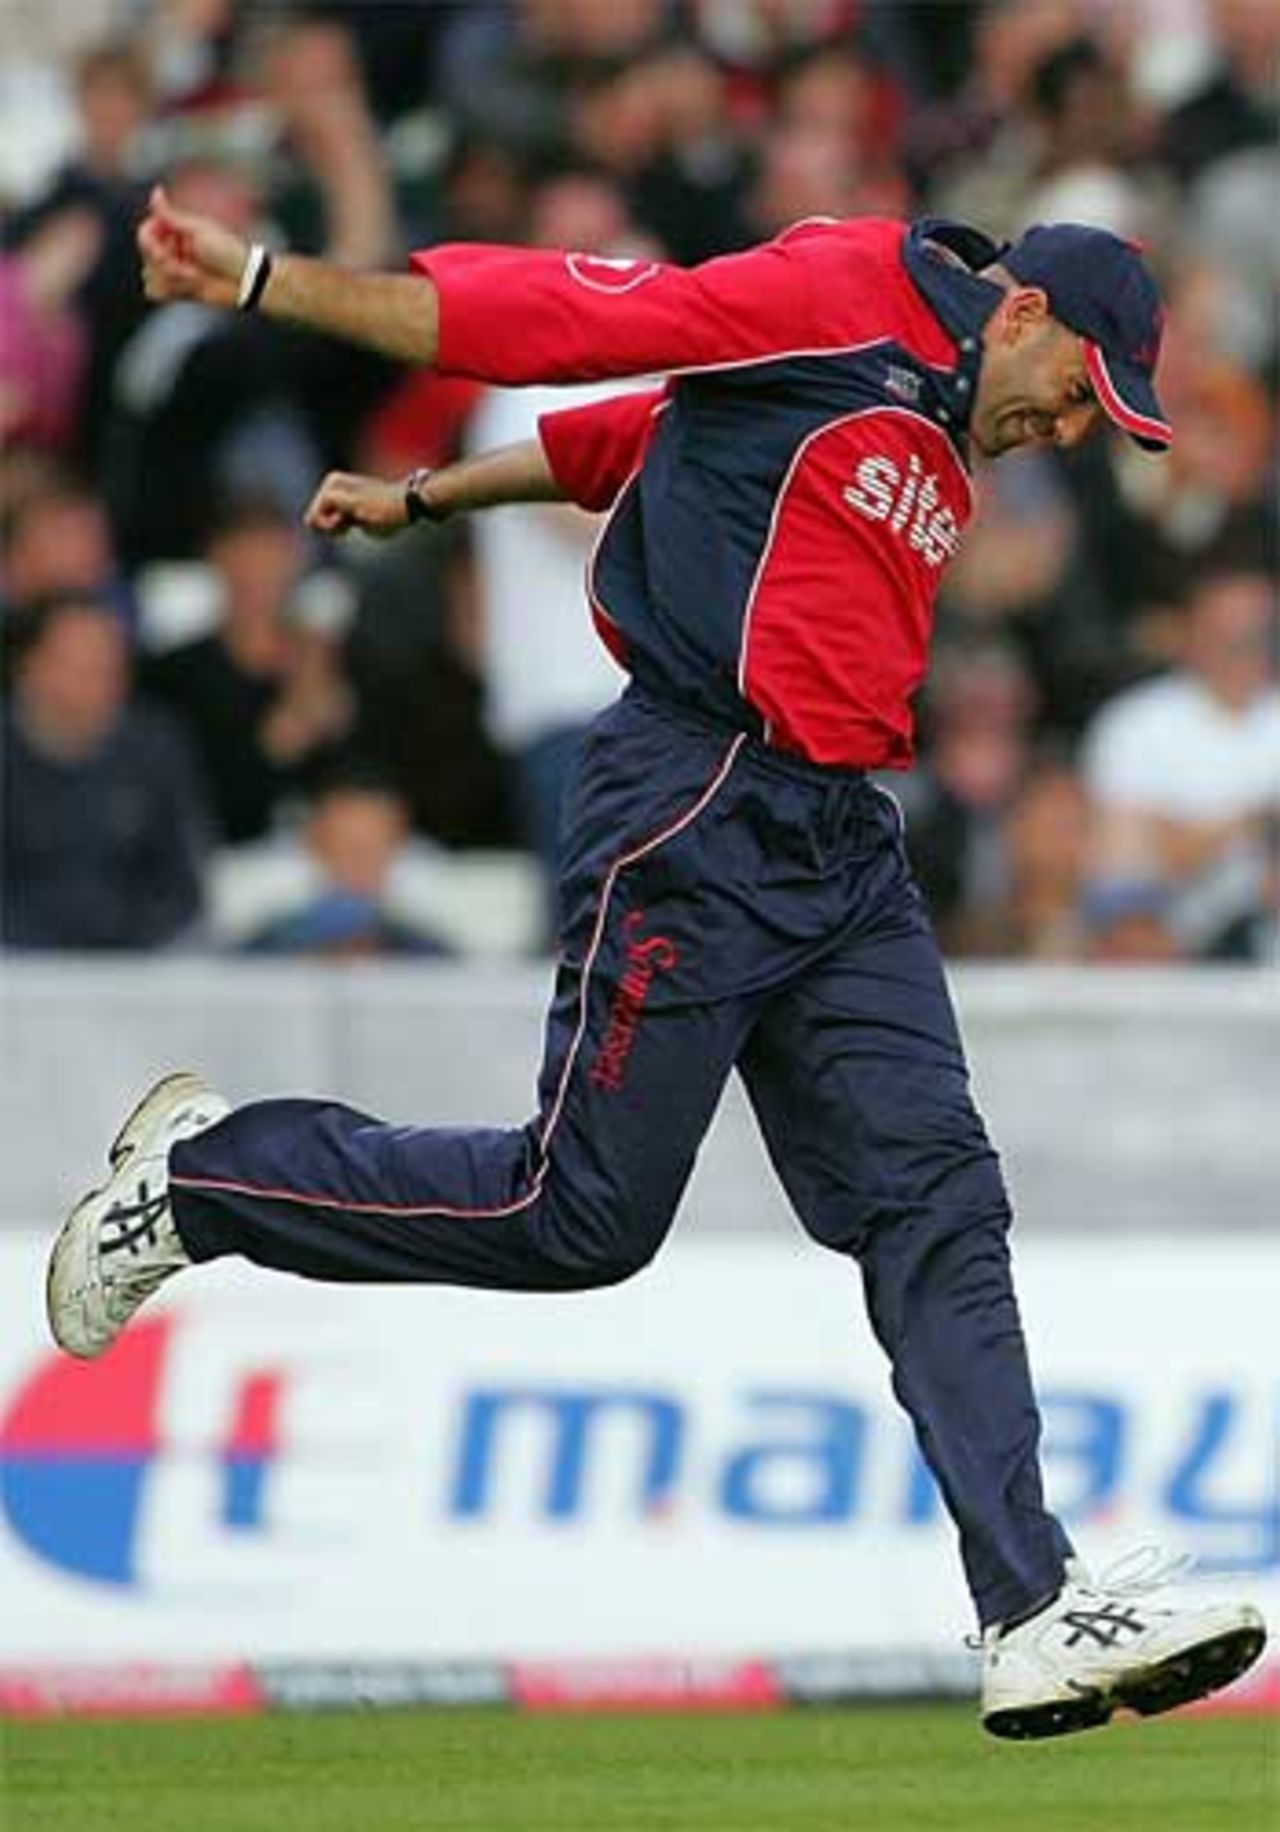 Richard Johnson celebrates booking Somerset's place in the final, Leicestershire v Somerset, Twenty20 semi-final, The Oval, July 30, 2005